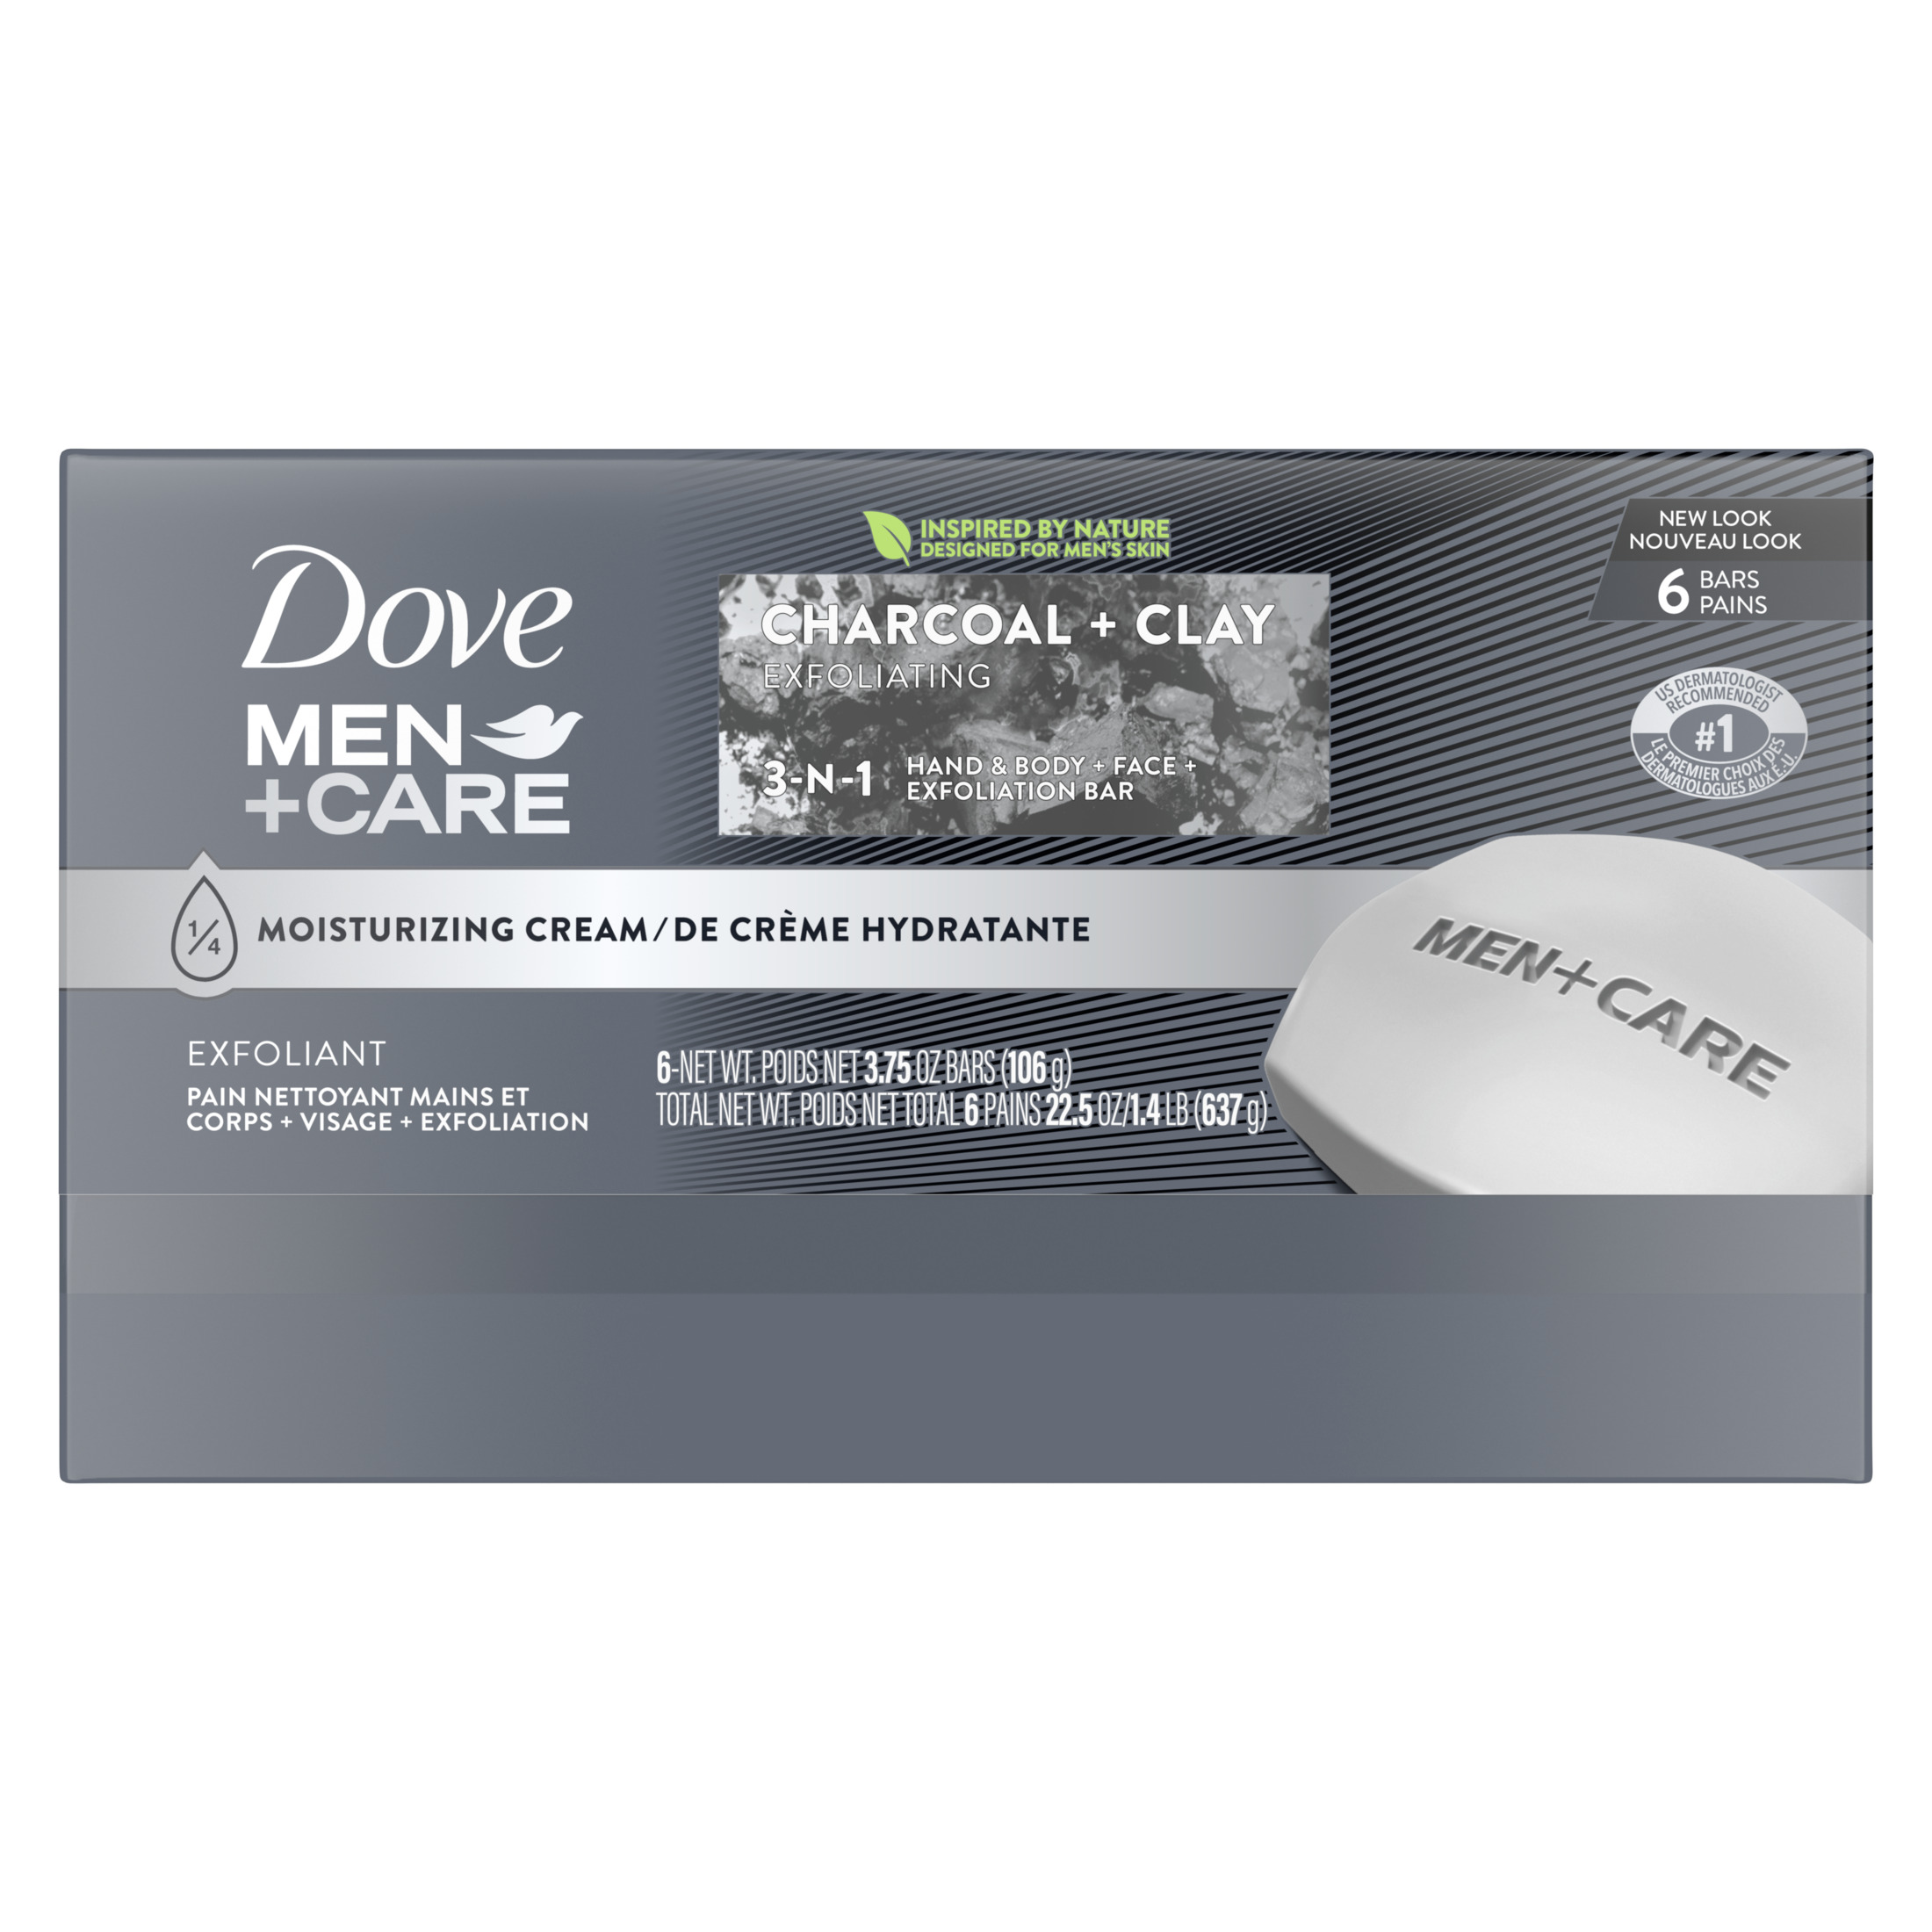 Dove Men+Care Elements Body and Face Bar Charcoal + Clay 3.75 oz, 6 Bar - image 5 of 7